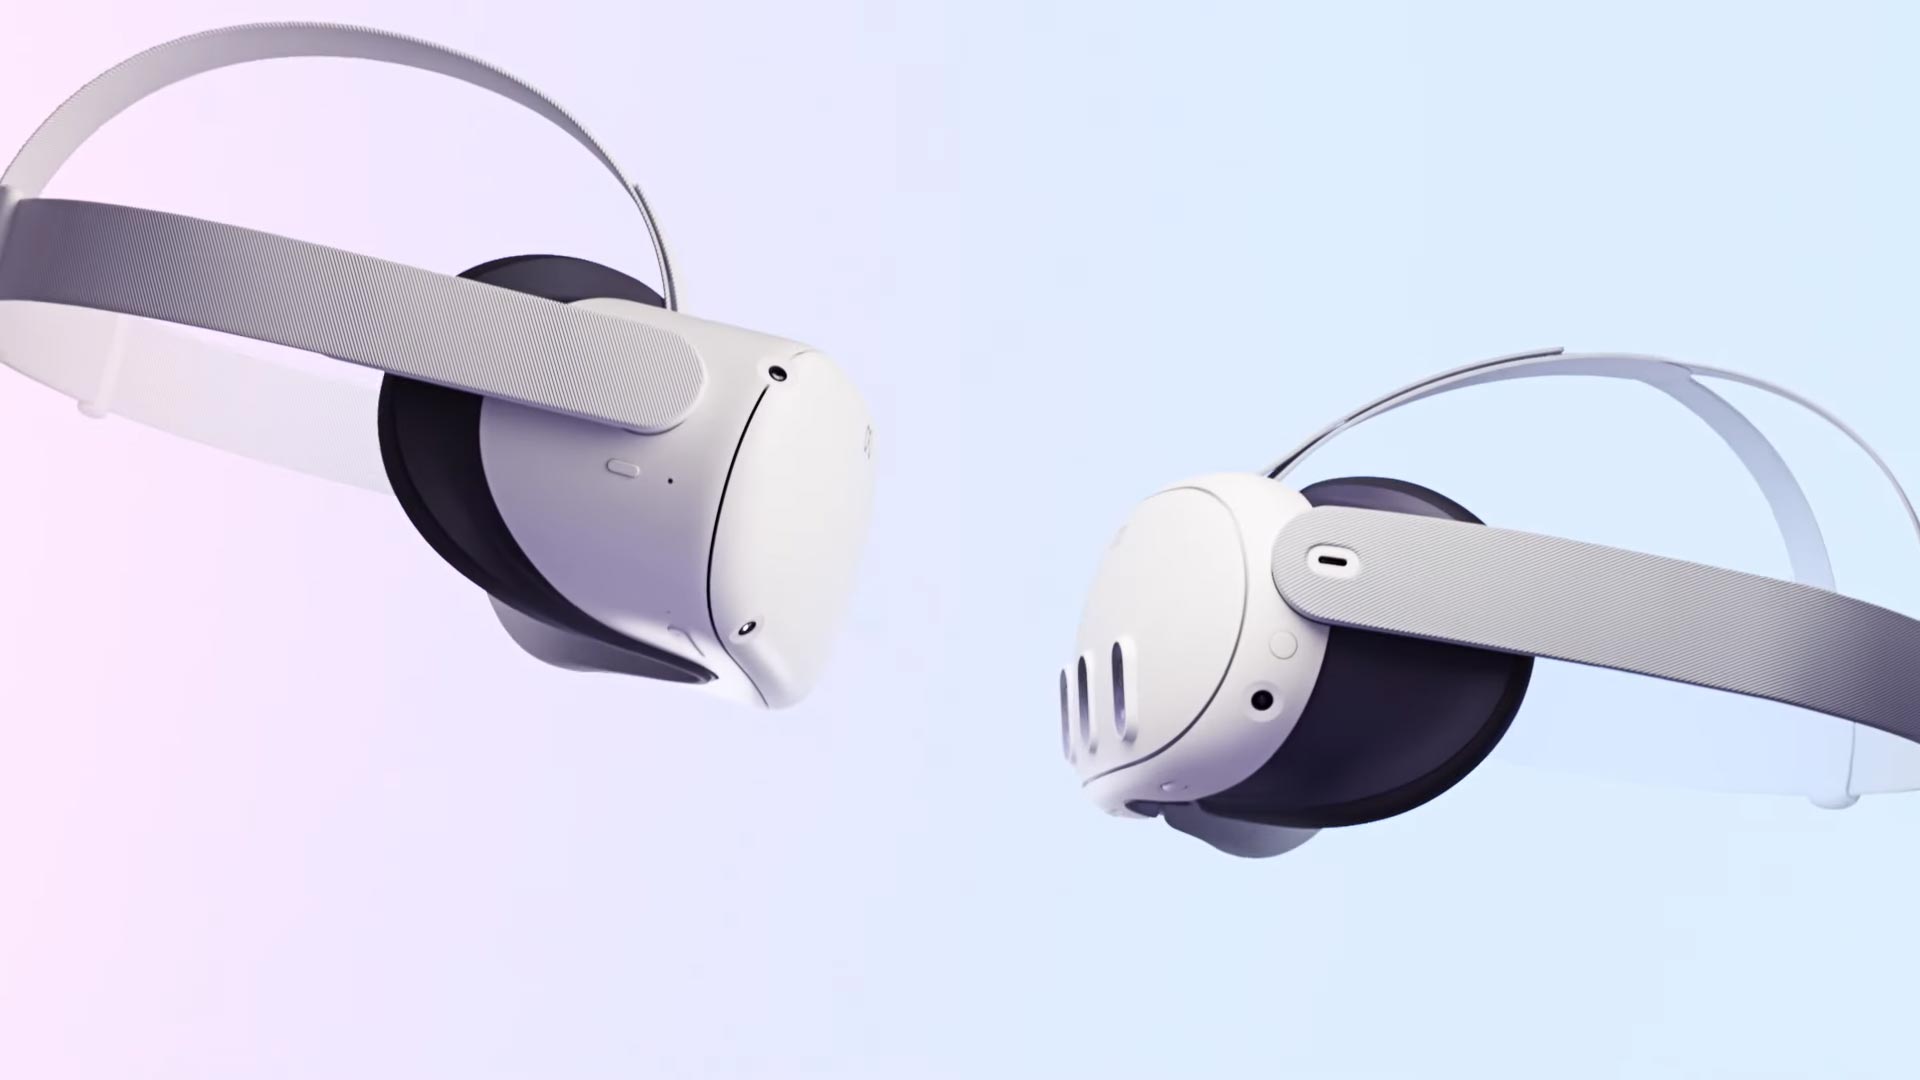 Quest 3 Will Cost $500 as Cheaper Headset Alternative to Apple